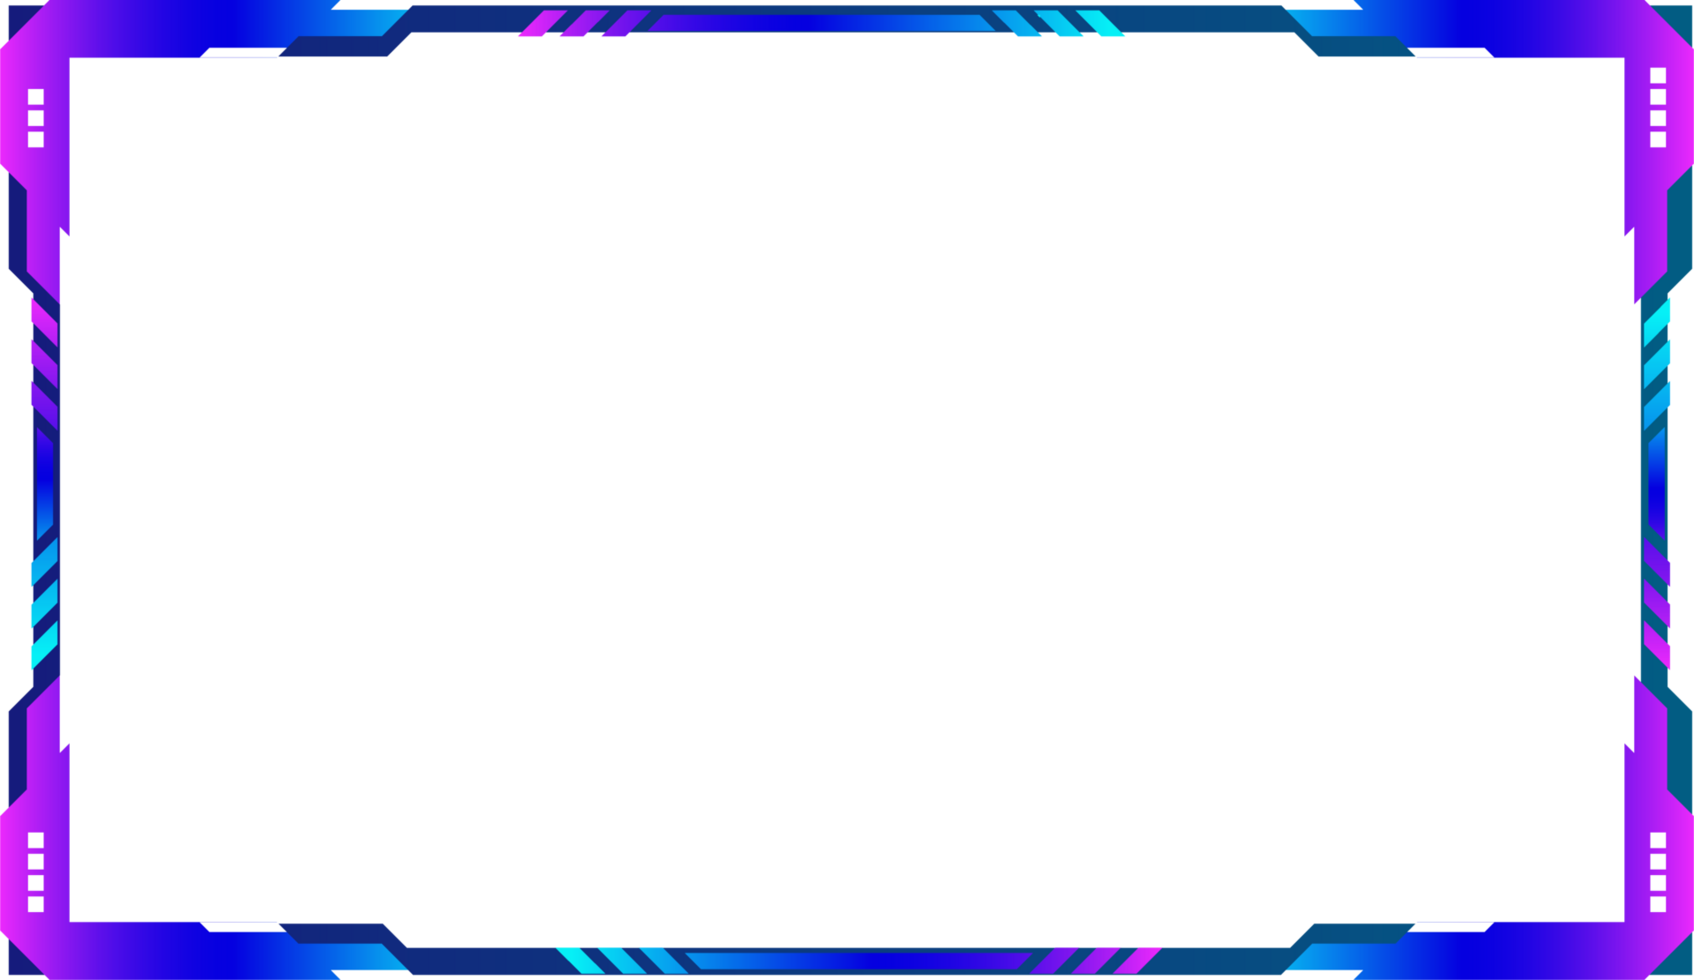 Metallic gaming overlay panel png with abstract shapes. Simple futuristic gaming screen panel design with pink and blue colors. Online game streaming overlay and user interface design.